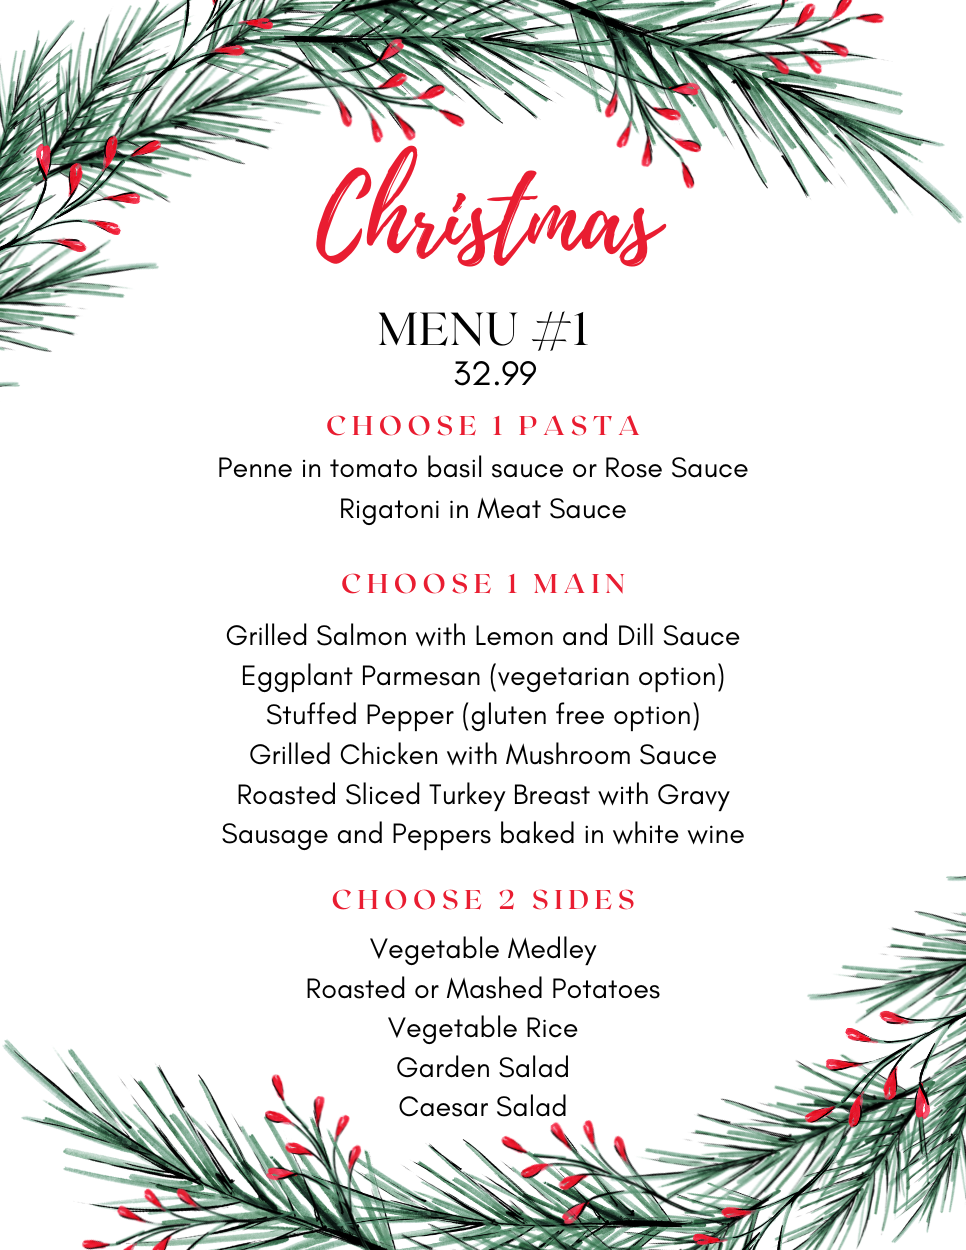 White and Green Festive Holiday Christmas Dinner Menu.png